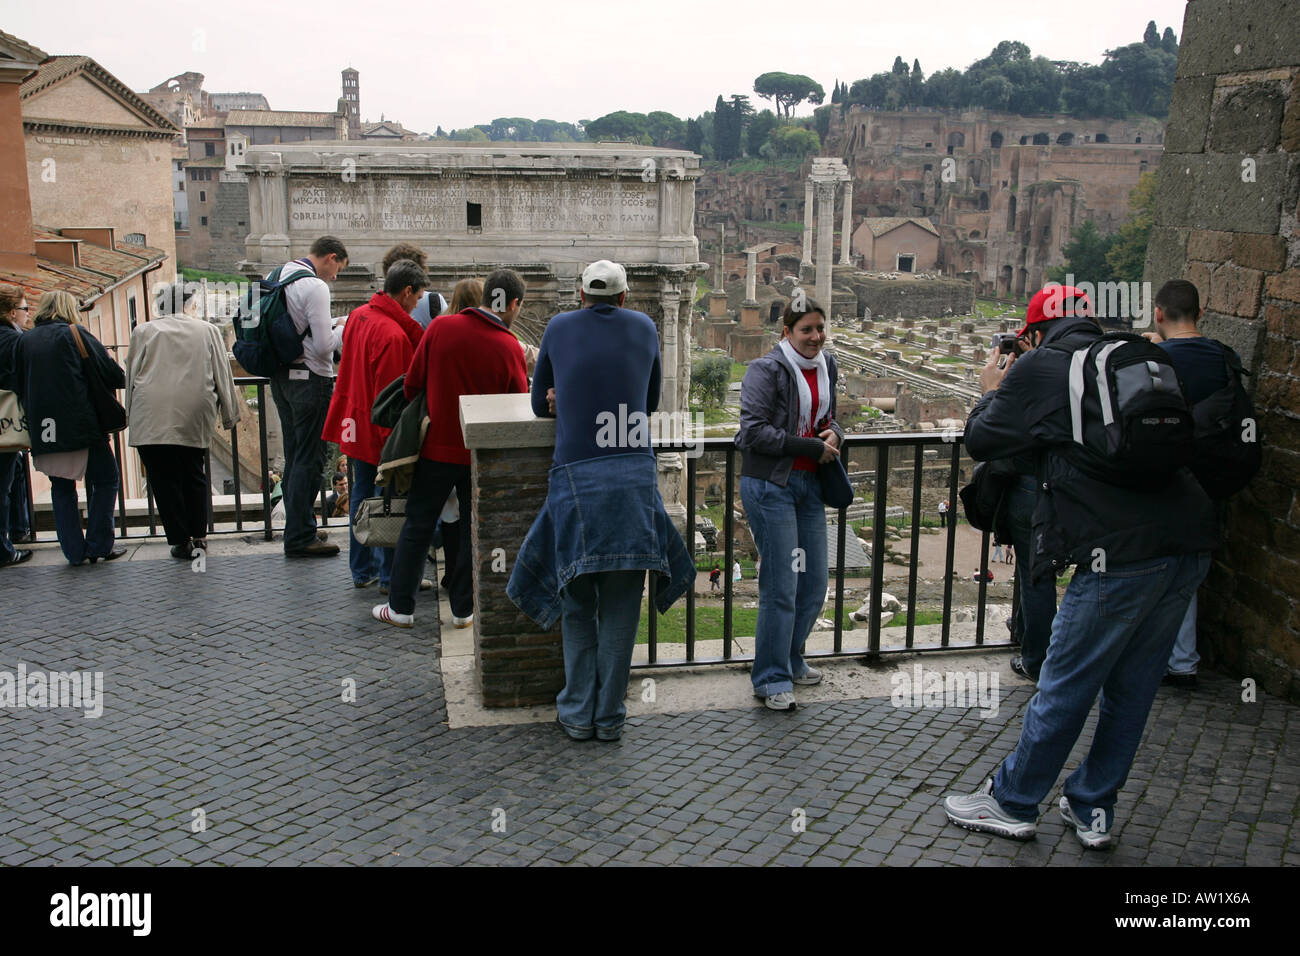 Toursits take photographs of each other in front of famous Rome visitor attraction the Roman Imperial Forum, Italy Europe Stock Photo